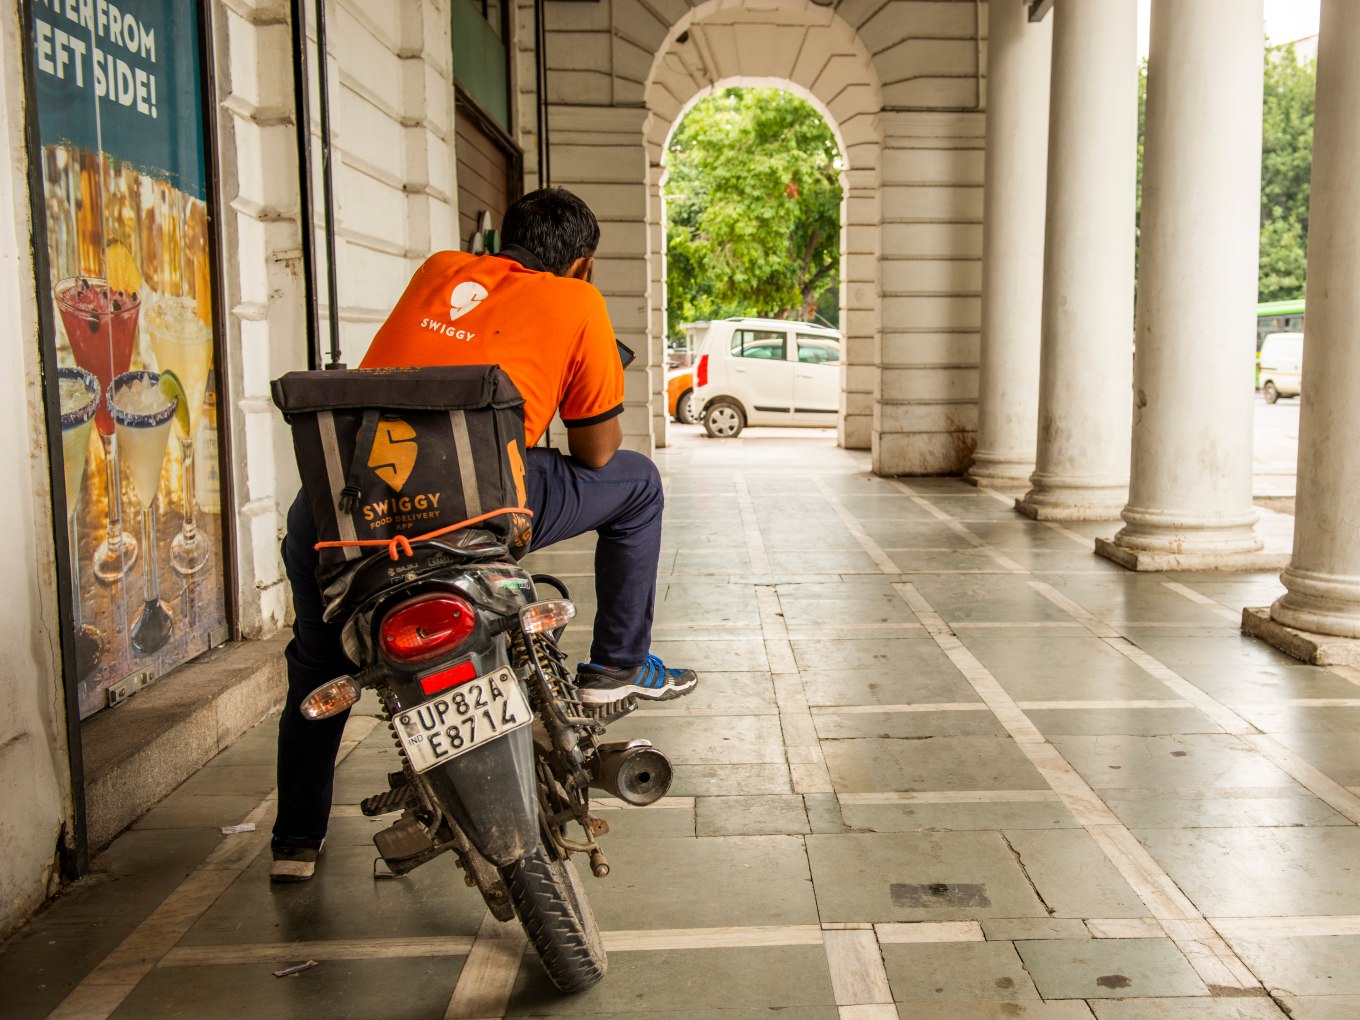 SoftBank's Bet On Swiggy Gets CCI Nod As Indian Food Delivery Race Heats Up